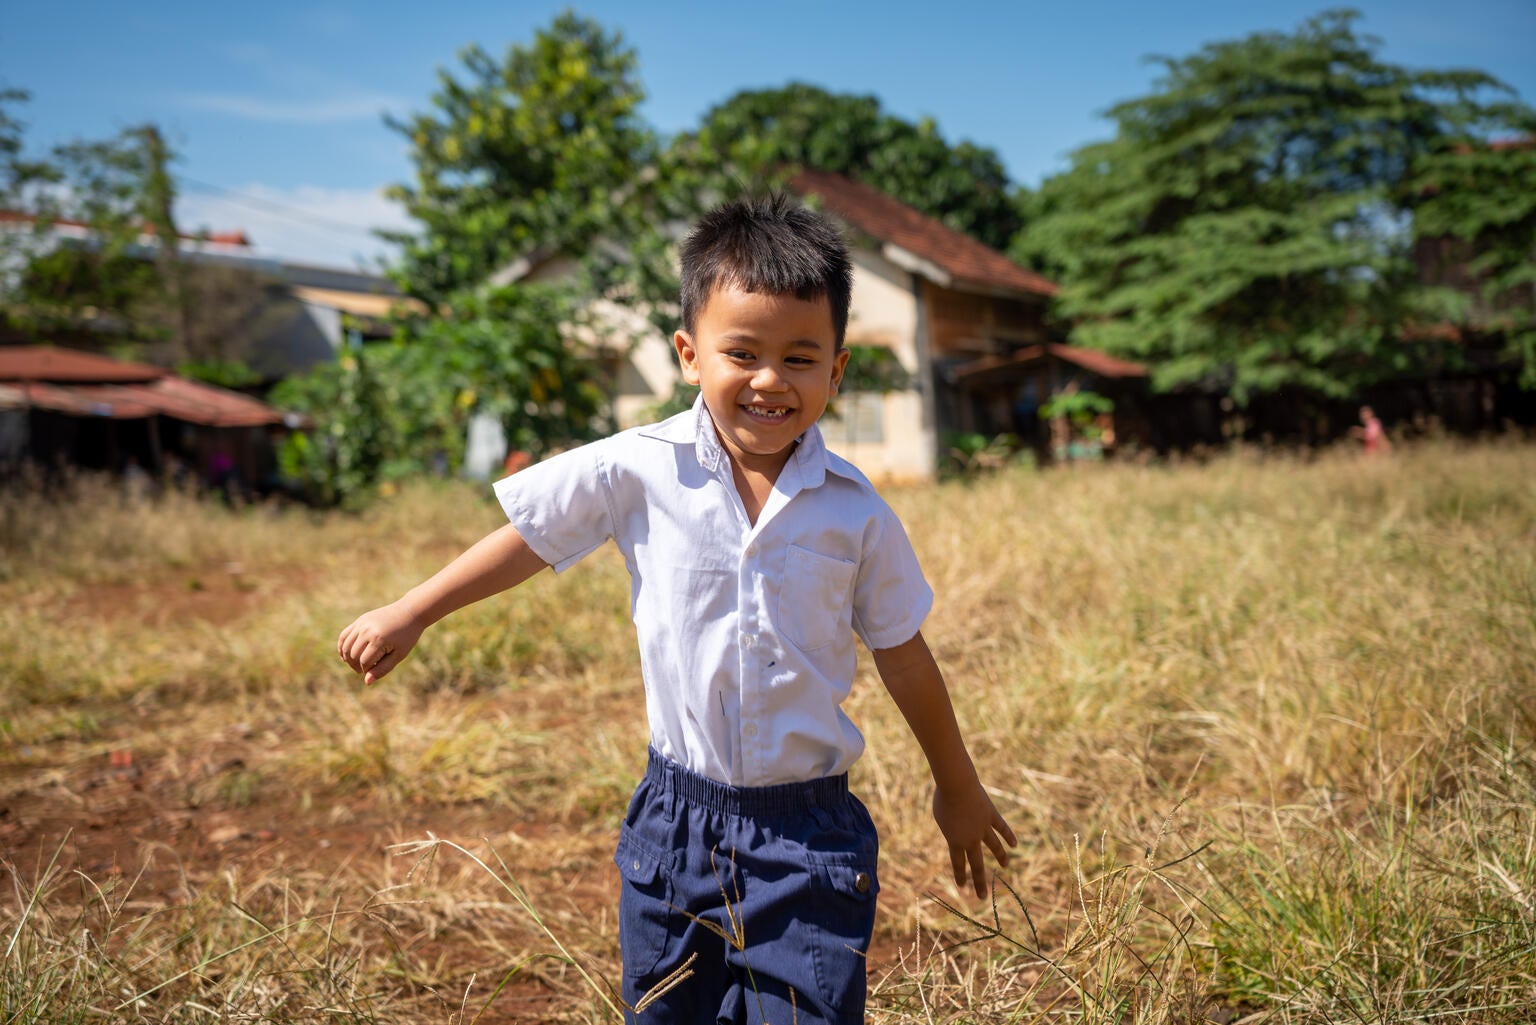 A young child running on a field. He is smiling.